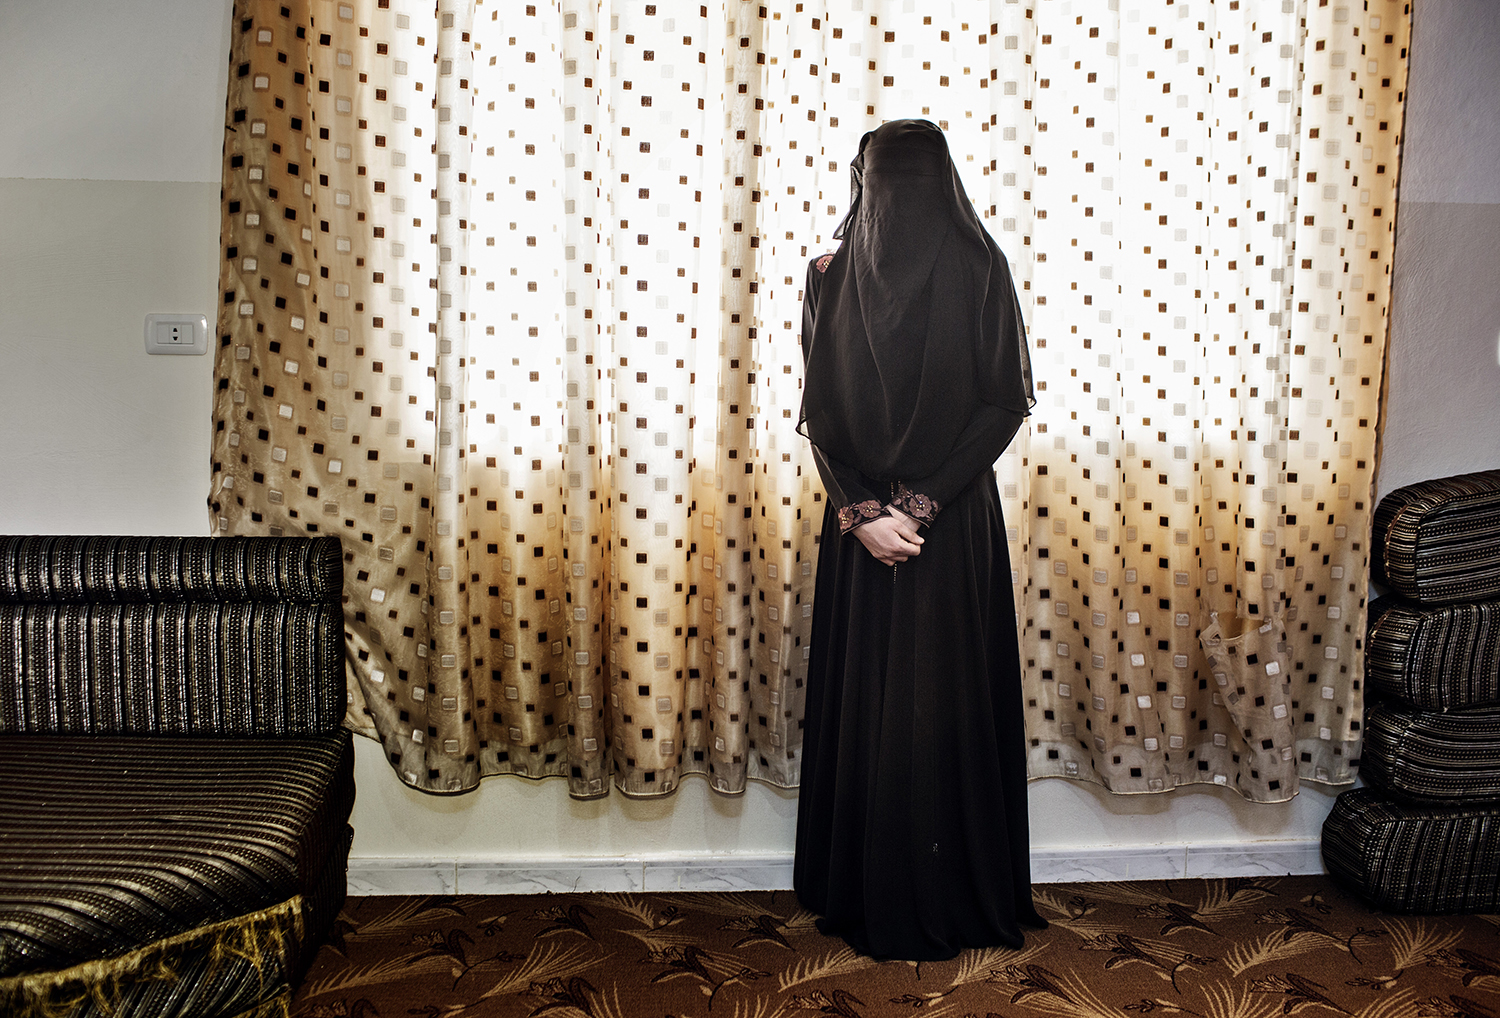 TOMORROW THERE WILL BE APRICOTS:2014, M, 15, (previously pictured w her sister) stands alone in the niqab she recently started wearing. Her 17 year old sister has just married, leaving her alone in the house with her widowed mother and four siblings. (they live in a "martyrs wive" building). The marriage proposals are already coming to her. She had dreamt of finishing high school and becoming a teacher. She says that while early marriage was common in Deraa, at least girls were allowed by their families to walk freely in their community and go to school. Here, she feels she is slowly dying indoors, day in and day out.Their mother is fairly conservative, and does not mind the rules of the "martyrs wives building". She says the are only worried about our safety and reputation and we are grateful for that. The Syrian ÒWives of MartyrsÓ are struggling to find a sense of normalcy in the dusty Jordanian border town of Ramtha, painfully close to the home and life they once had in Deraa. The burdens of violence are present in their scant belongings, heavy mementos to remind themselves of those they lost in the war. Digital era lockets: cherished cell phone images of dead fathers, husbands, and brothers lost to SyriaÕs bloody uprising. ÒTomorrow there will be apricotsÓ is a popular proverb in the Levant, which means, ÒTomorrow never comes.Ó I first met many of these women in 2012 when their husbands and fathers were still alive, fighting for the FSA. The photos explore intimacies of everyday life of four families headed by wives who have lost their fighter husbands to the civil war. They show the quiet celebrations and daydreams of the wives and daughters of martyrs who now live in a building donated by a Qatari patron, despite traditions that frown upon displays of joy for single women, who are already caught in a vicious cycle of poverty, isolation, and anxiety.